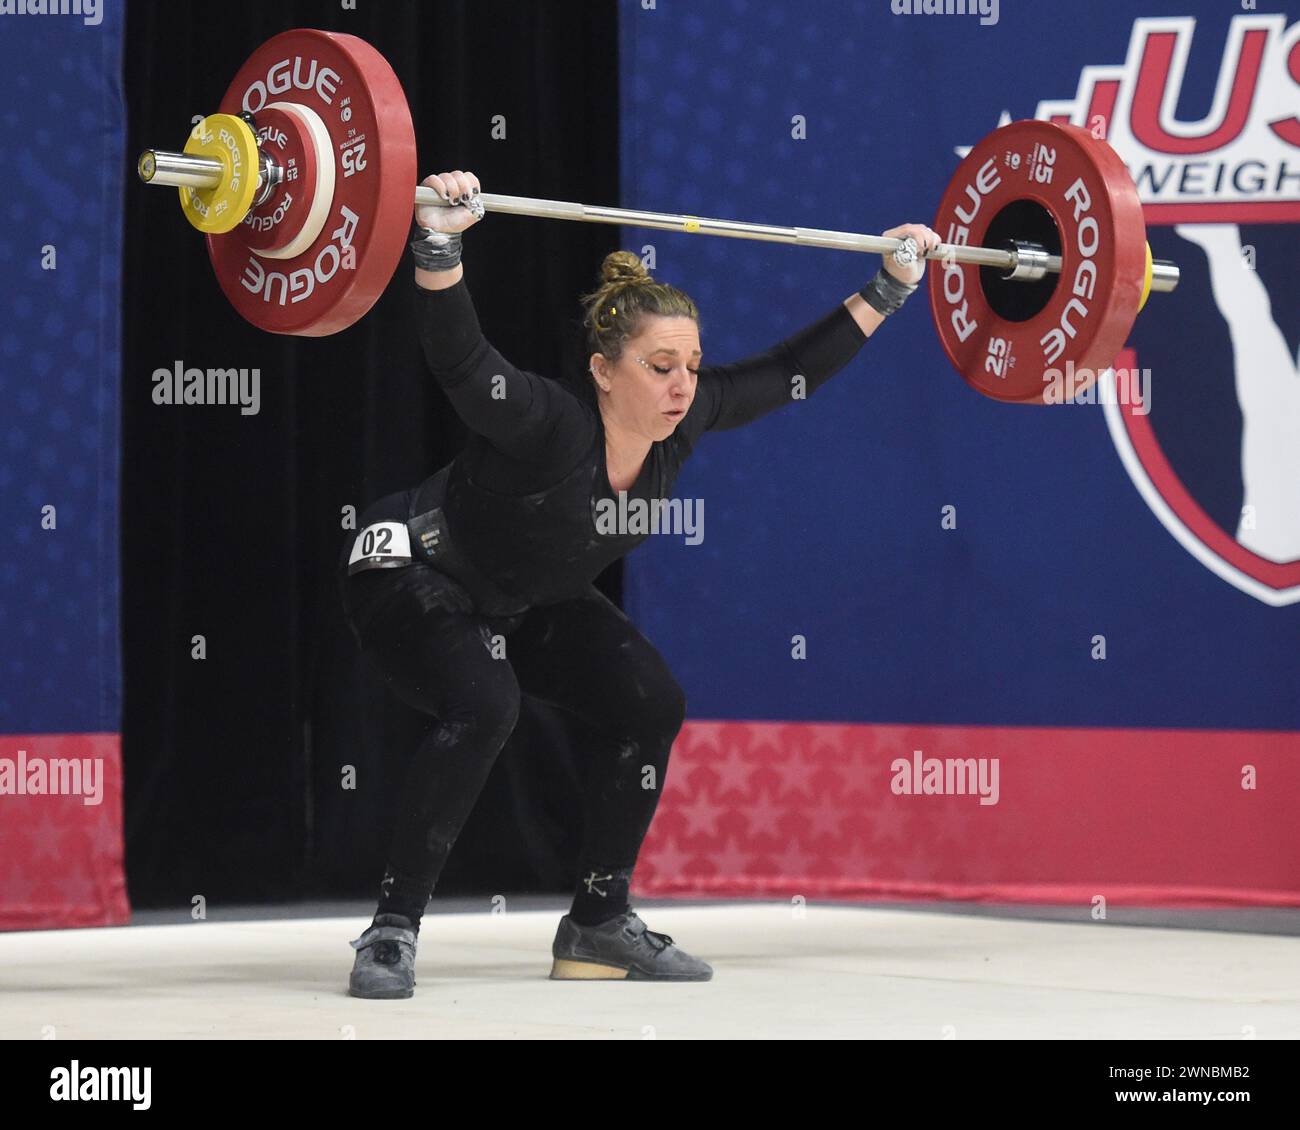 Columbus, Ohio, United States. Mar 1 Feb, 2024. Shelby Pflug misses an 88kg snatch in the Women's Weightlifting Championships at the Arnold Sports Festival in Columbus, Ohio, USA. Credit: Brent Clark/Alamy Live News Stock Photo